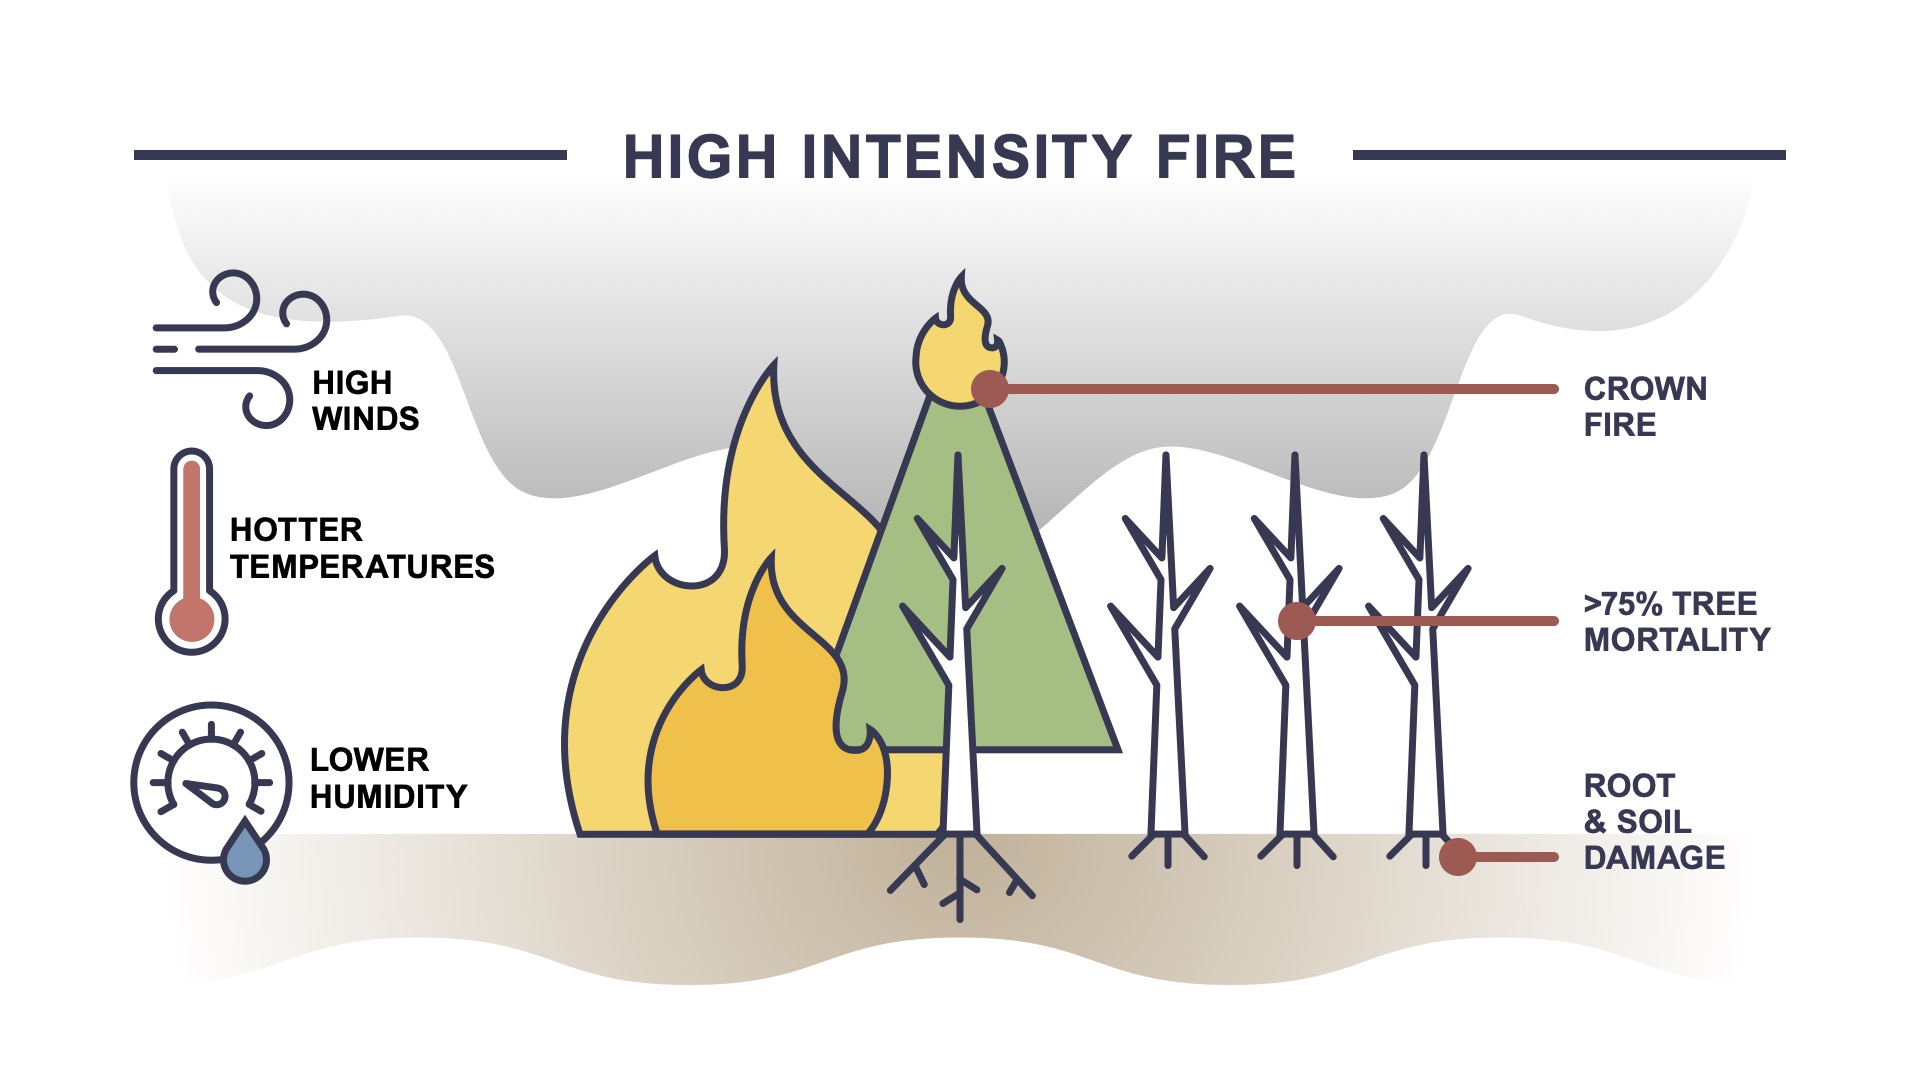 Fires that burn at a high intensity can scarify the soil, making it hard for plants to reroot and grow. That, in turn, can create the perfect conditions for floods. // Graphic by Kate Fox-Amato